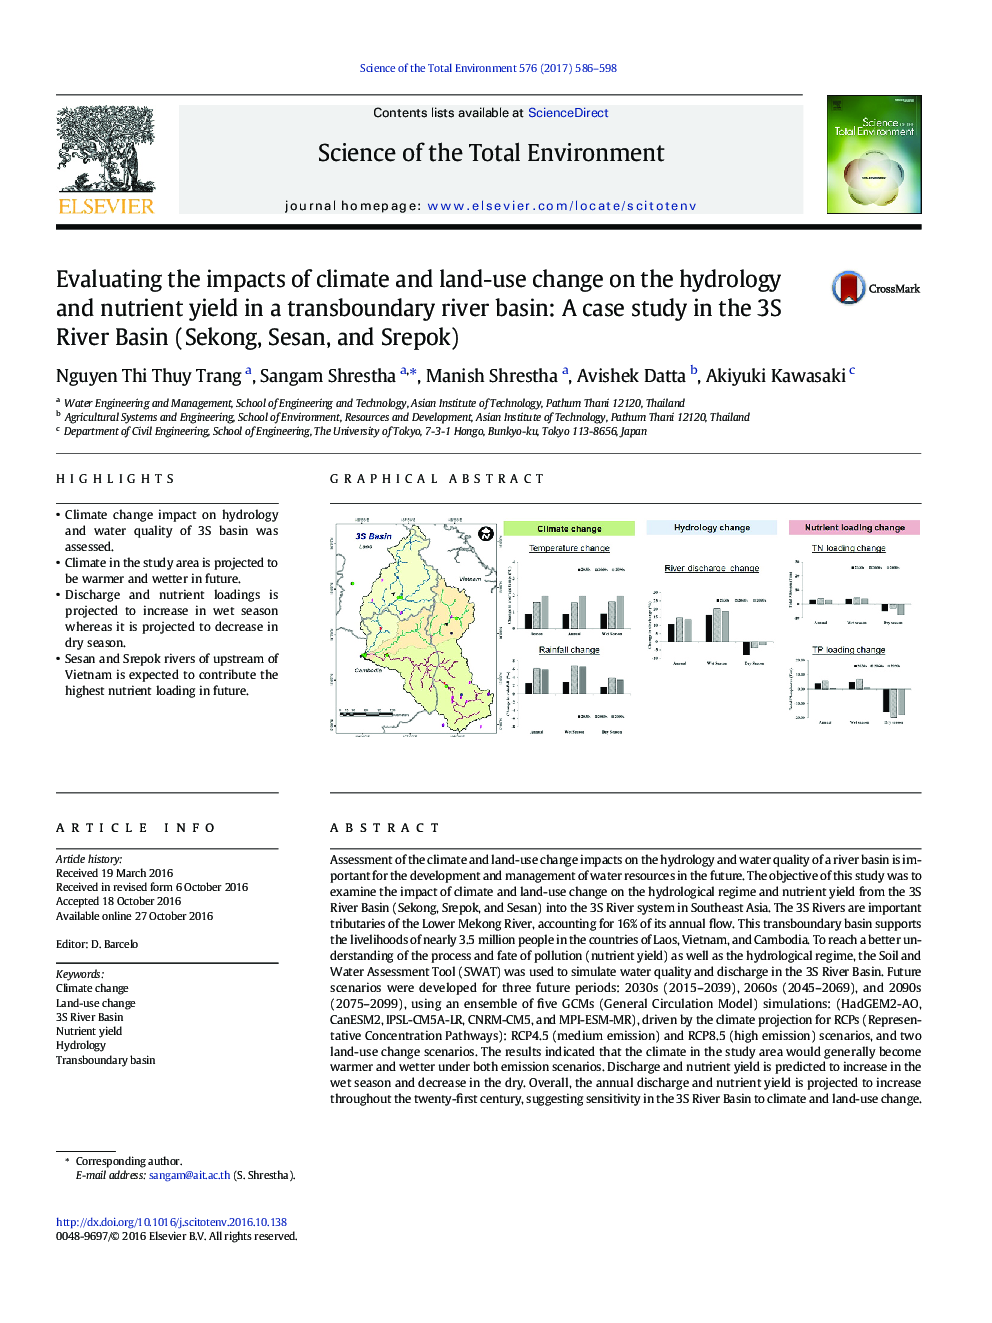 Evaluating the impacts of climate and land-use change on the hydrology and nutrient yield in a transboundary river basin: A case study in the 3S River Basin (Sekong, Sesan, and Srepok)